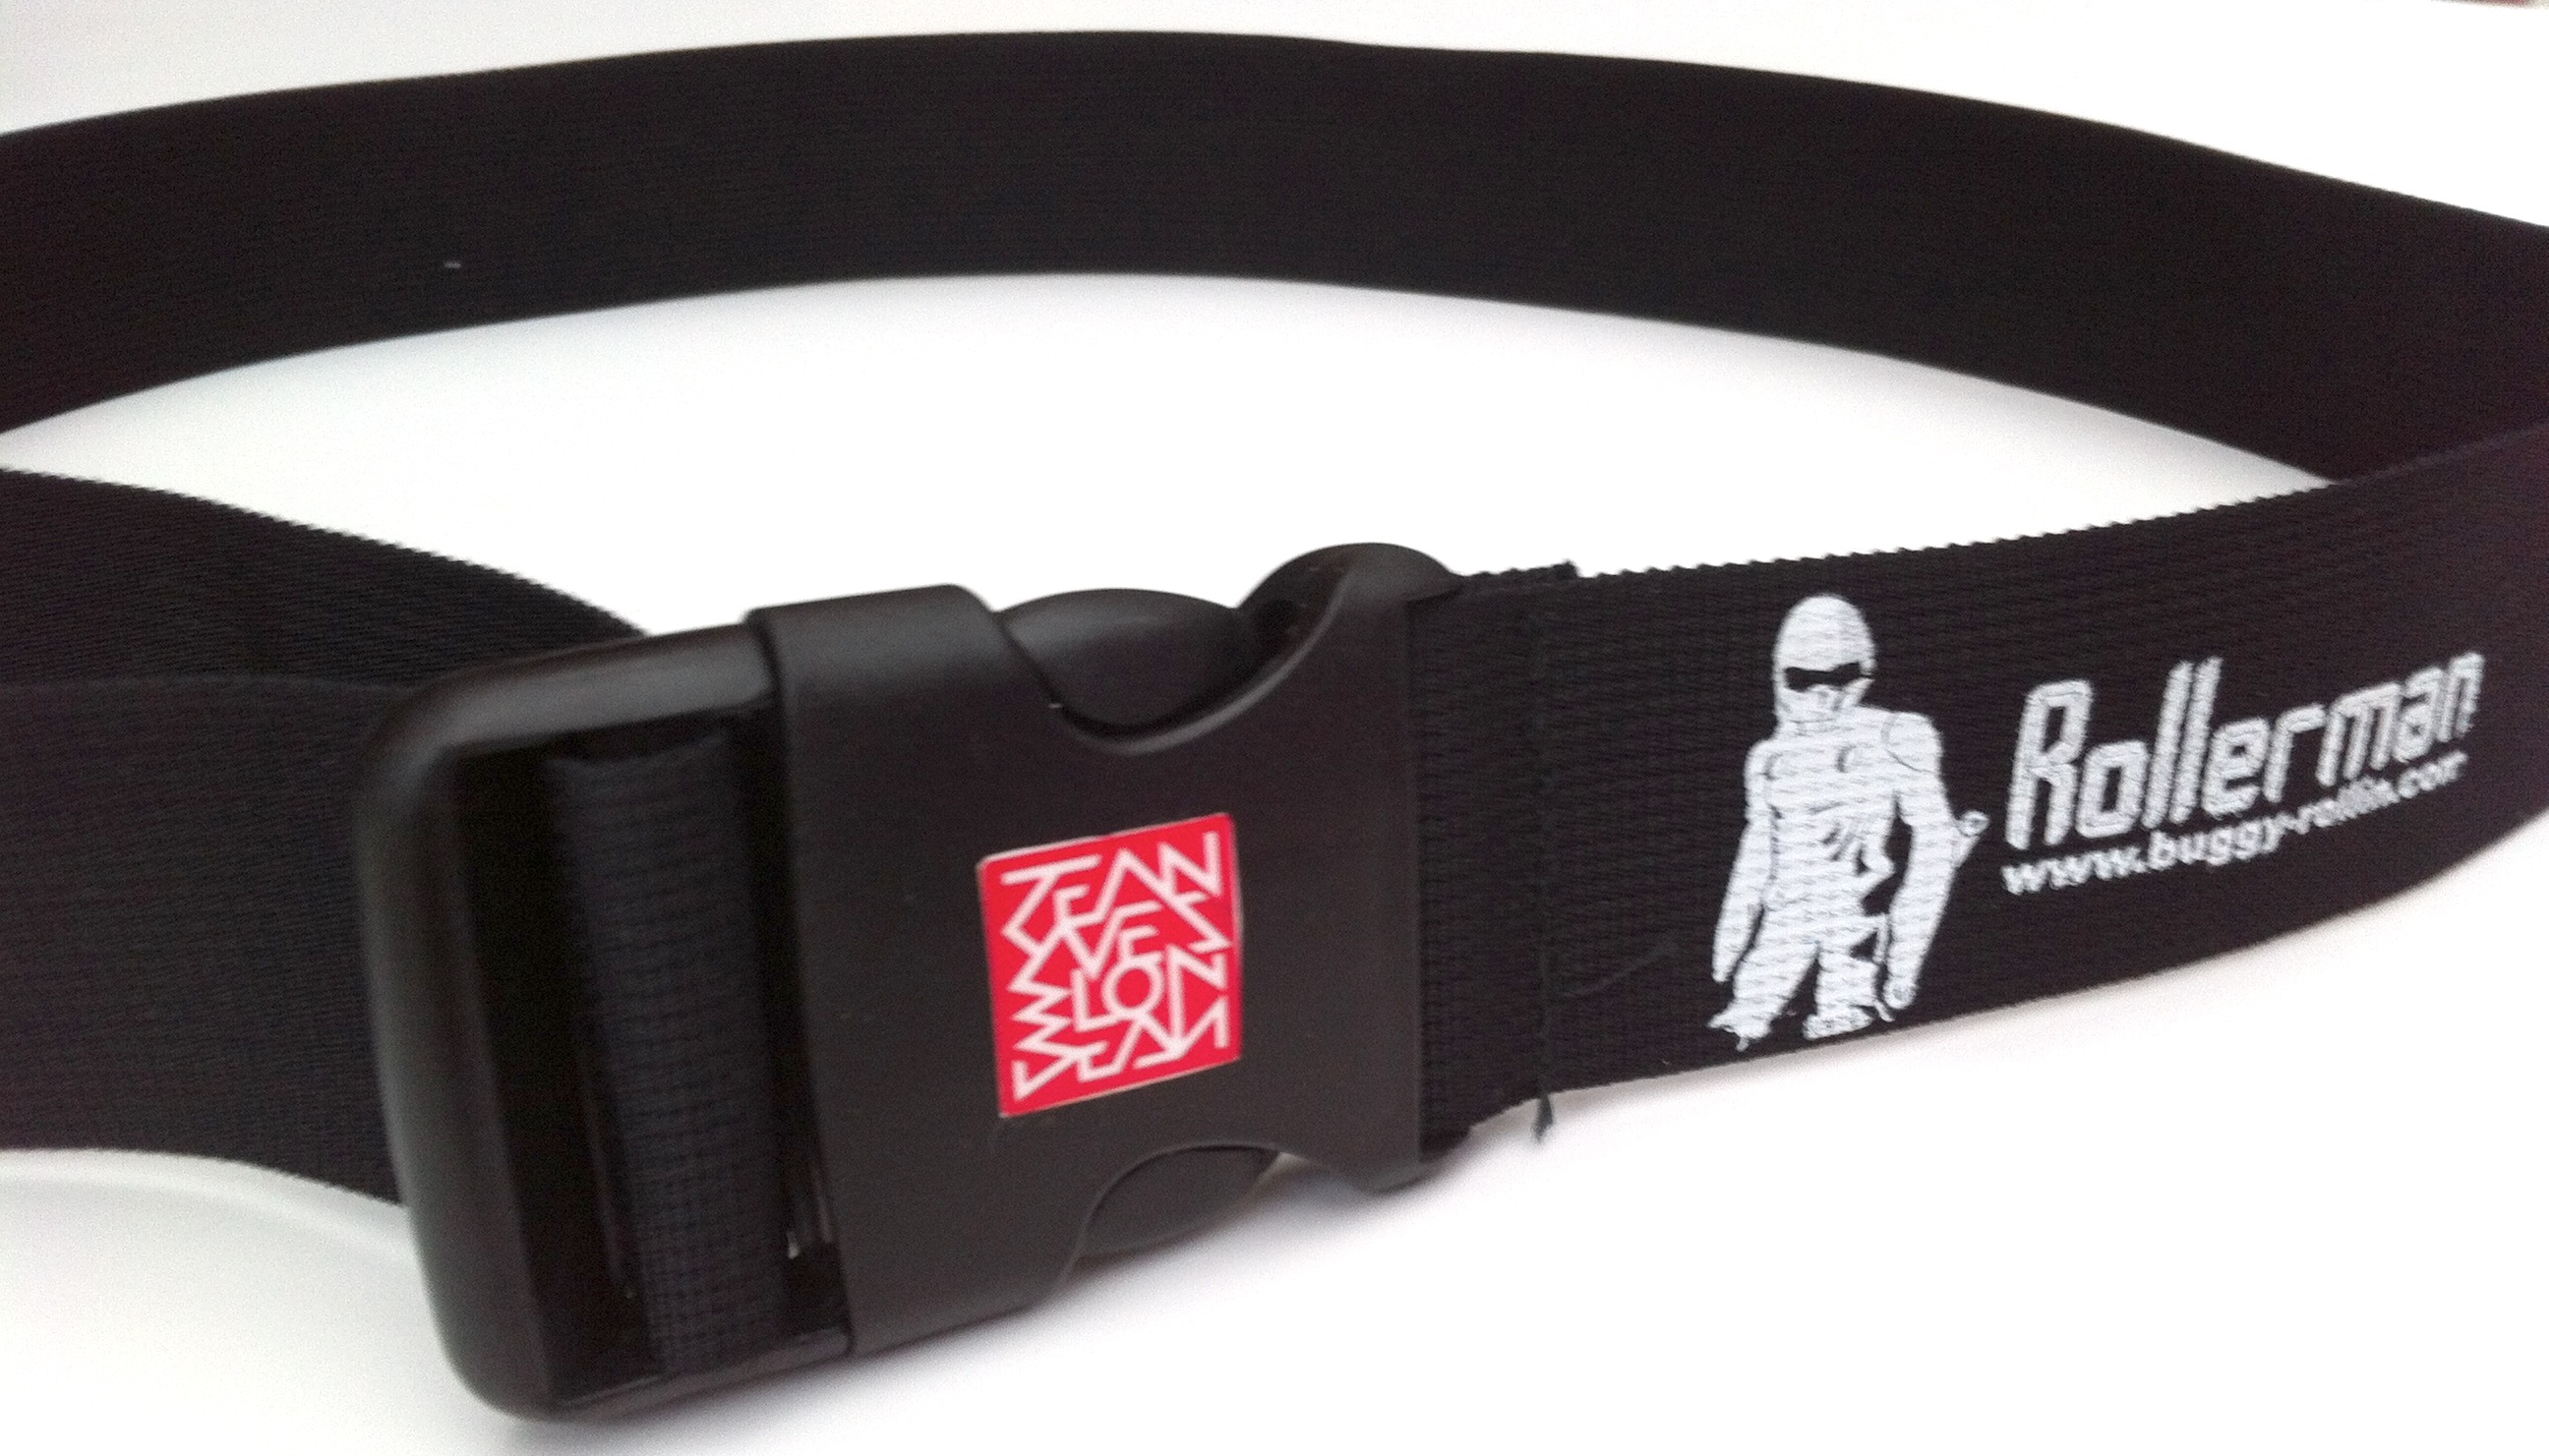 jean yves blondeau red square logo on the buckle of buggy rollin belt